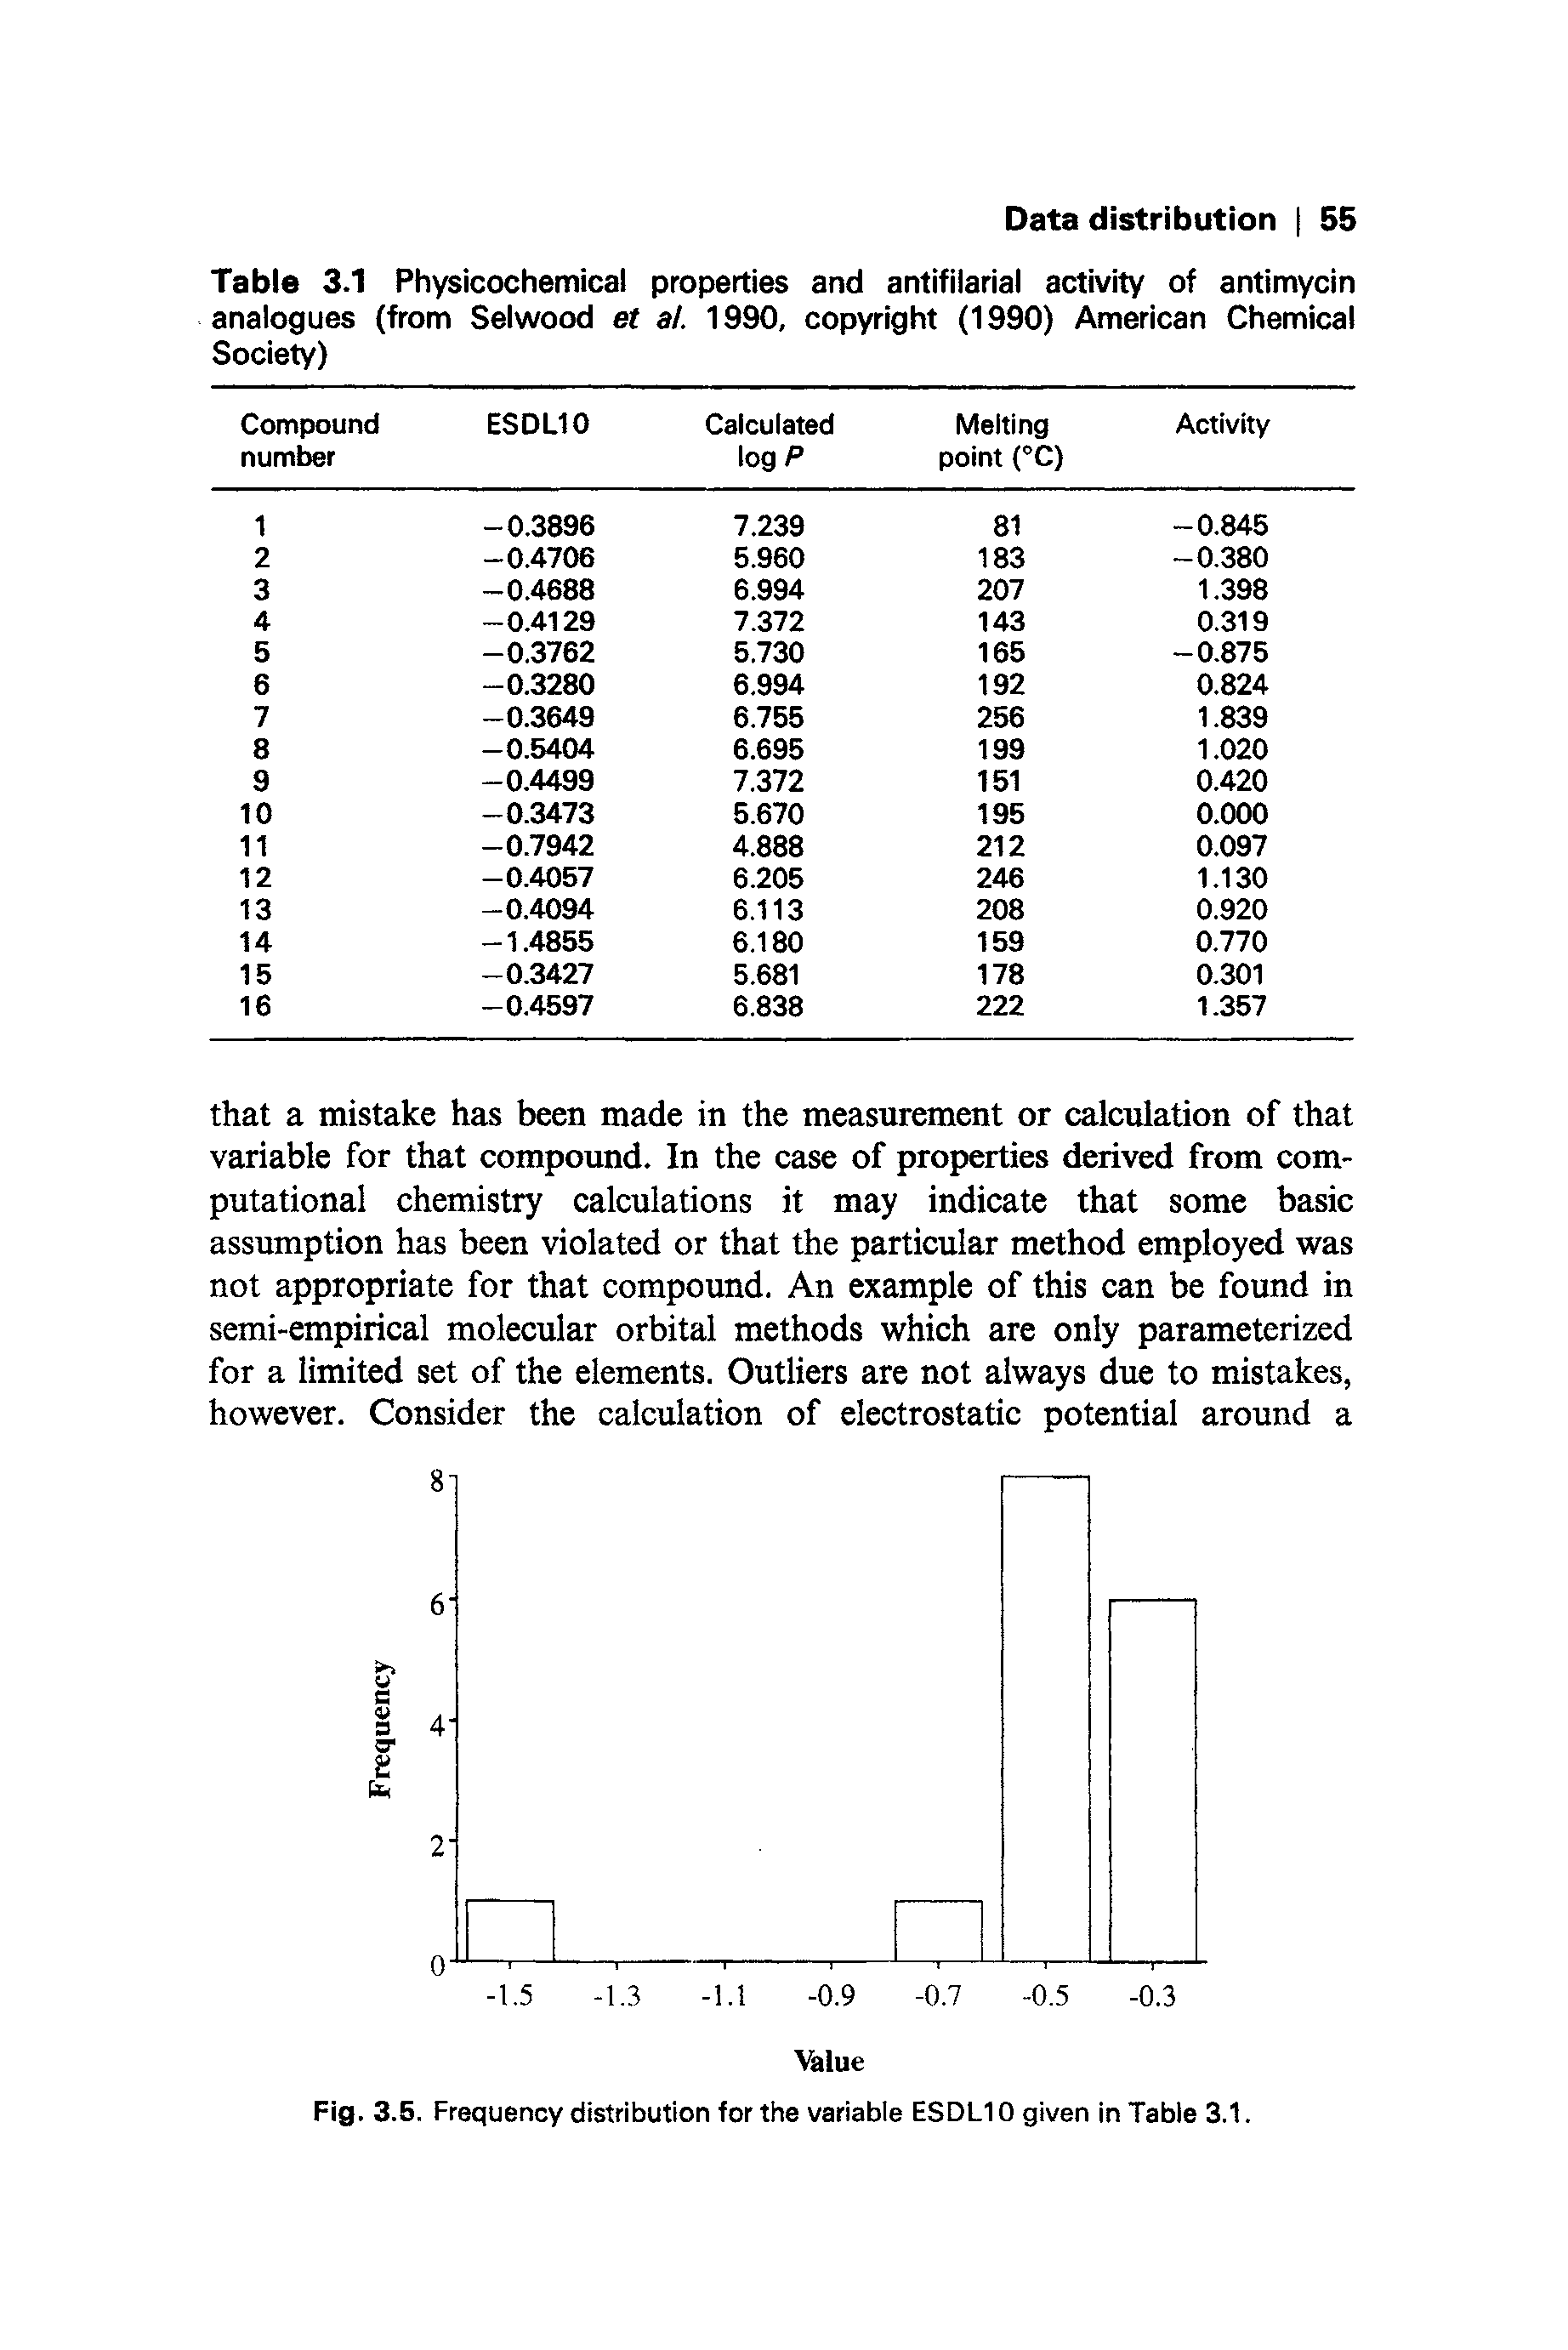 Table 3.1 Physicochemical properties and antifilarial activity of antimycin analogues (from Selwood ef at. 1990, copyright (1990) American Chemical Society)...